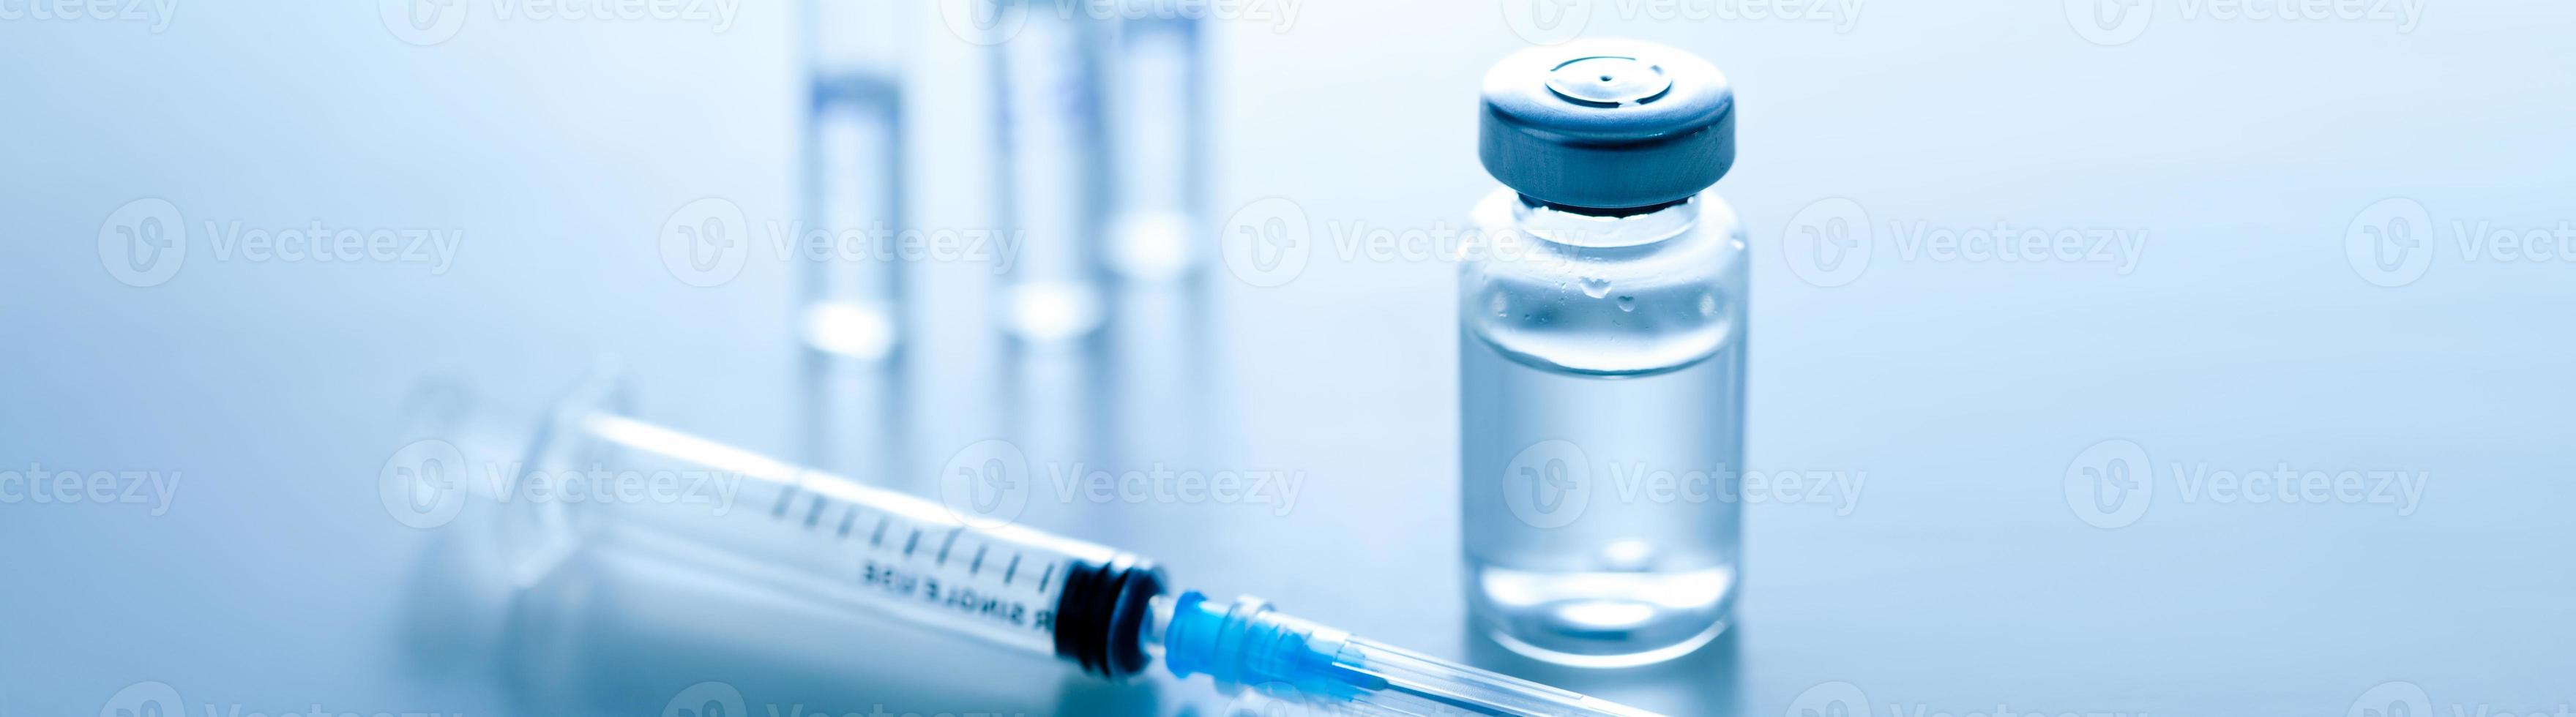 Medical syringe with a needle and a bollte with vaccine. photo